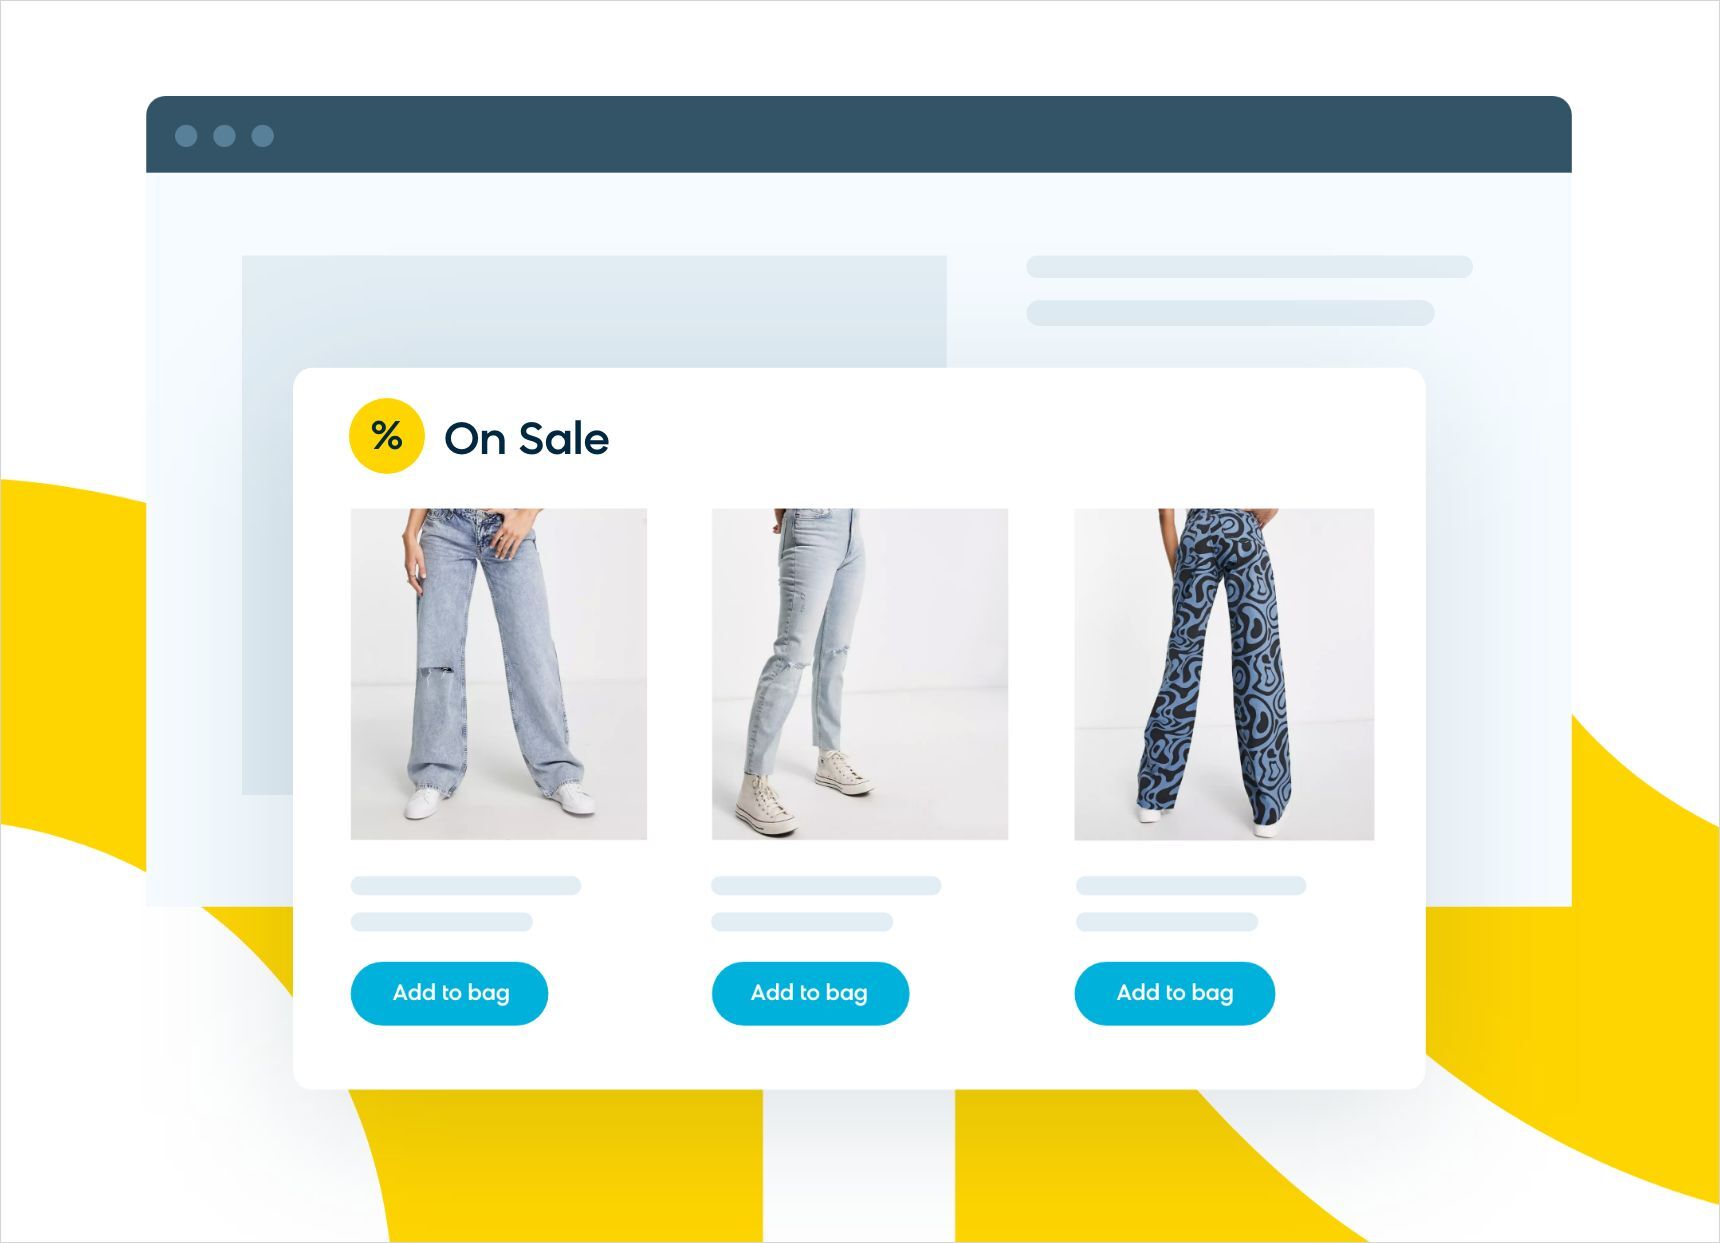 Example of rule-driven "On Sale" module on an ecommerce site